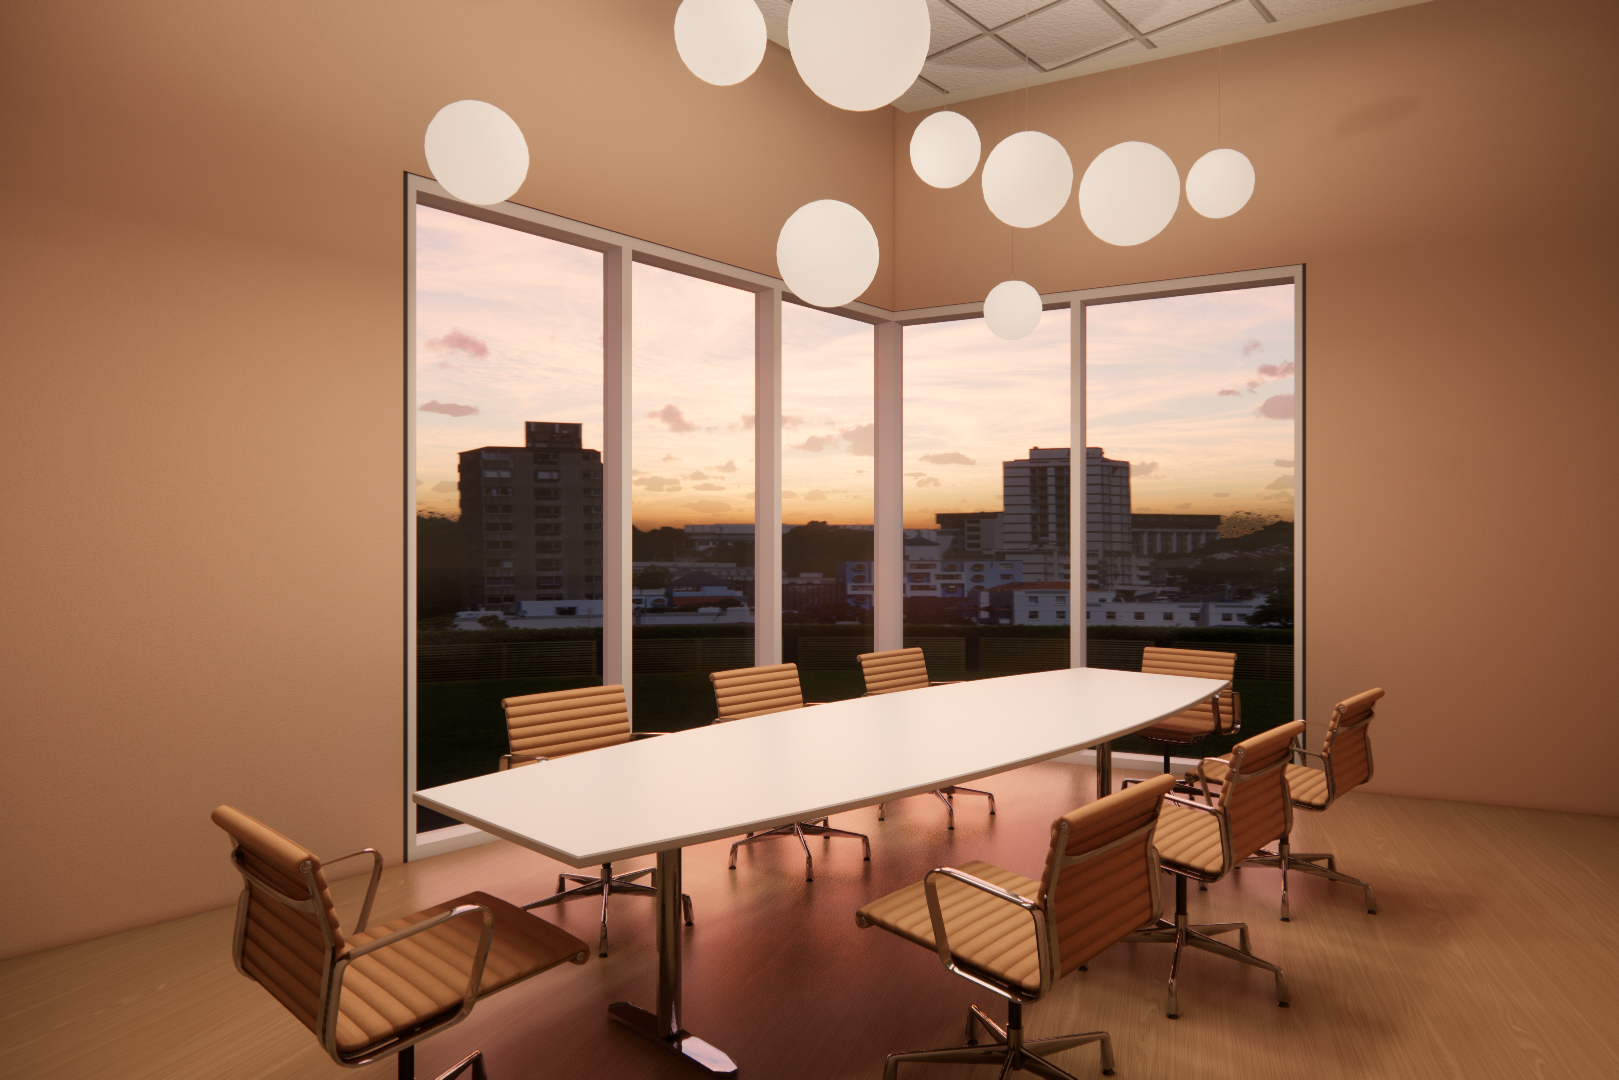 Conference Room Rendering